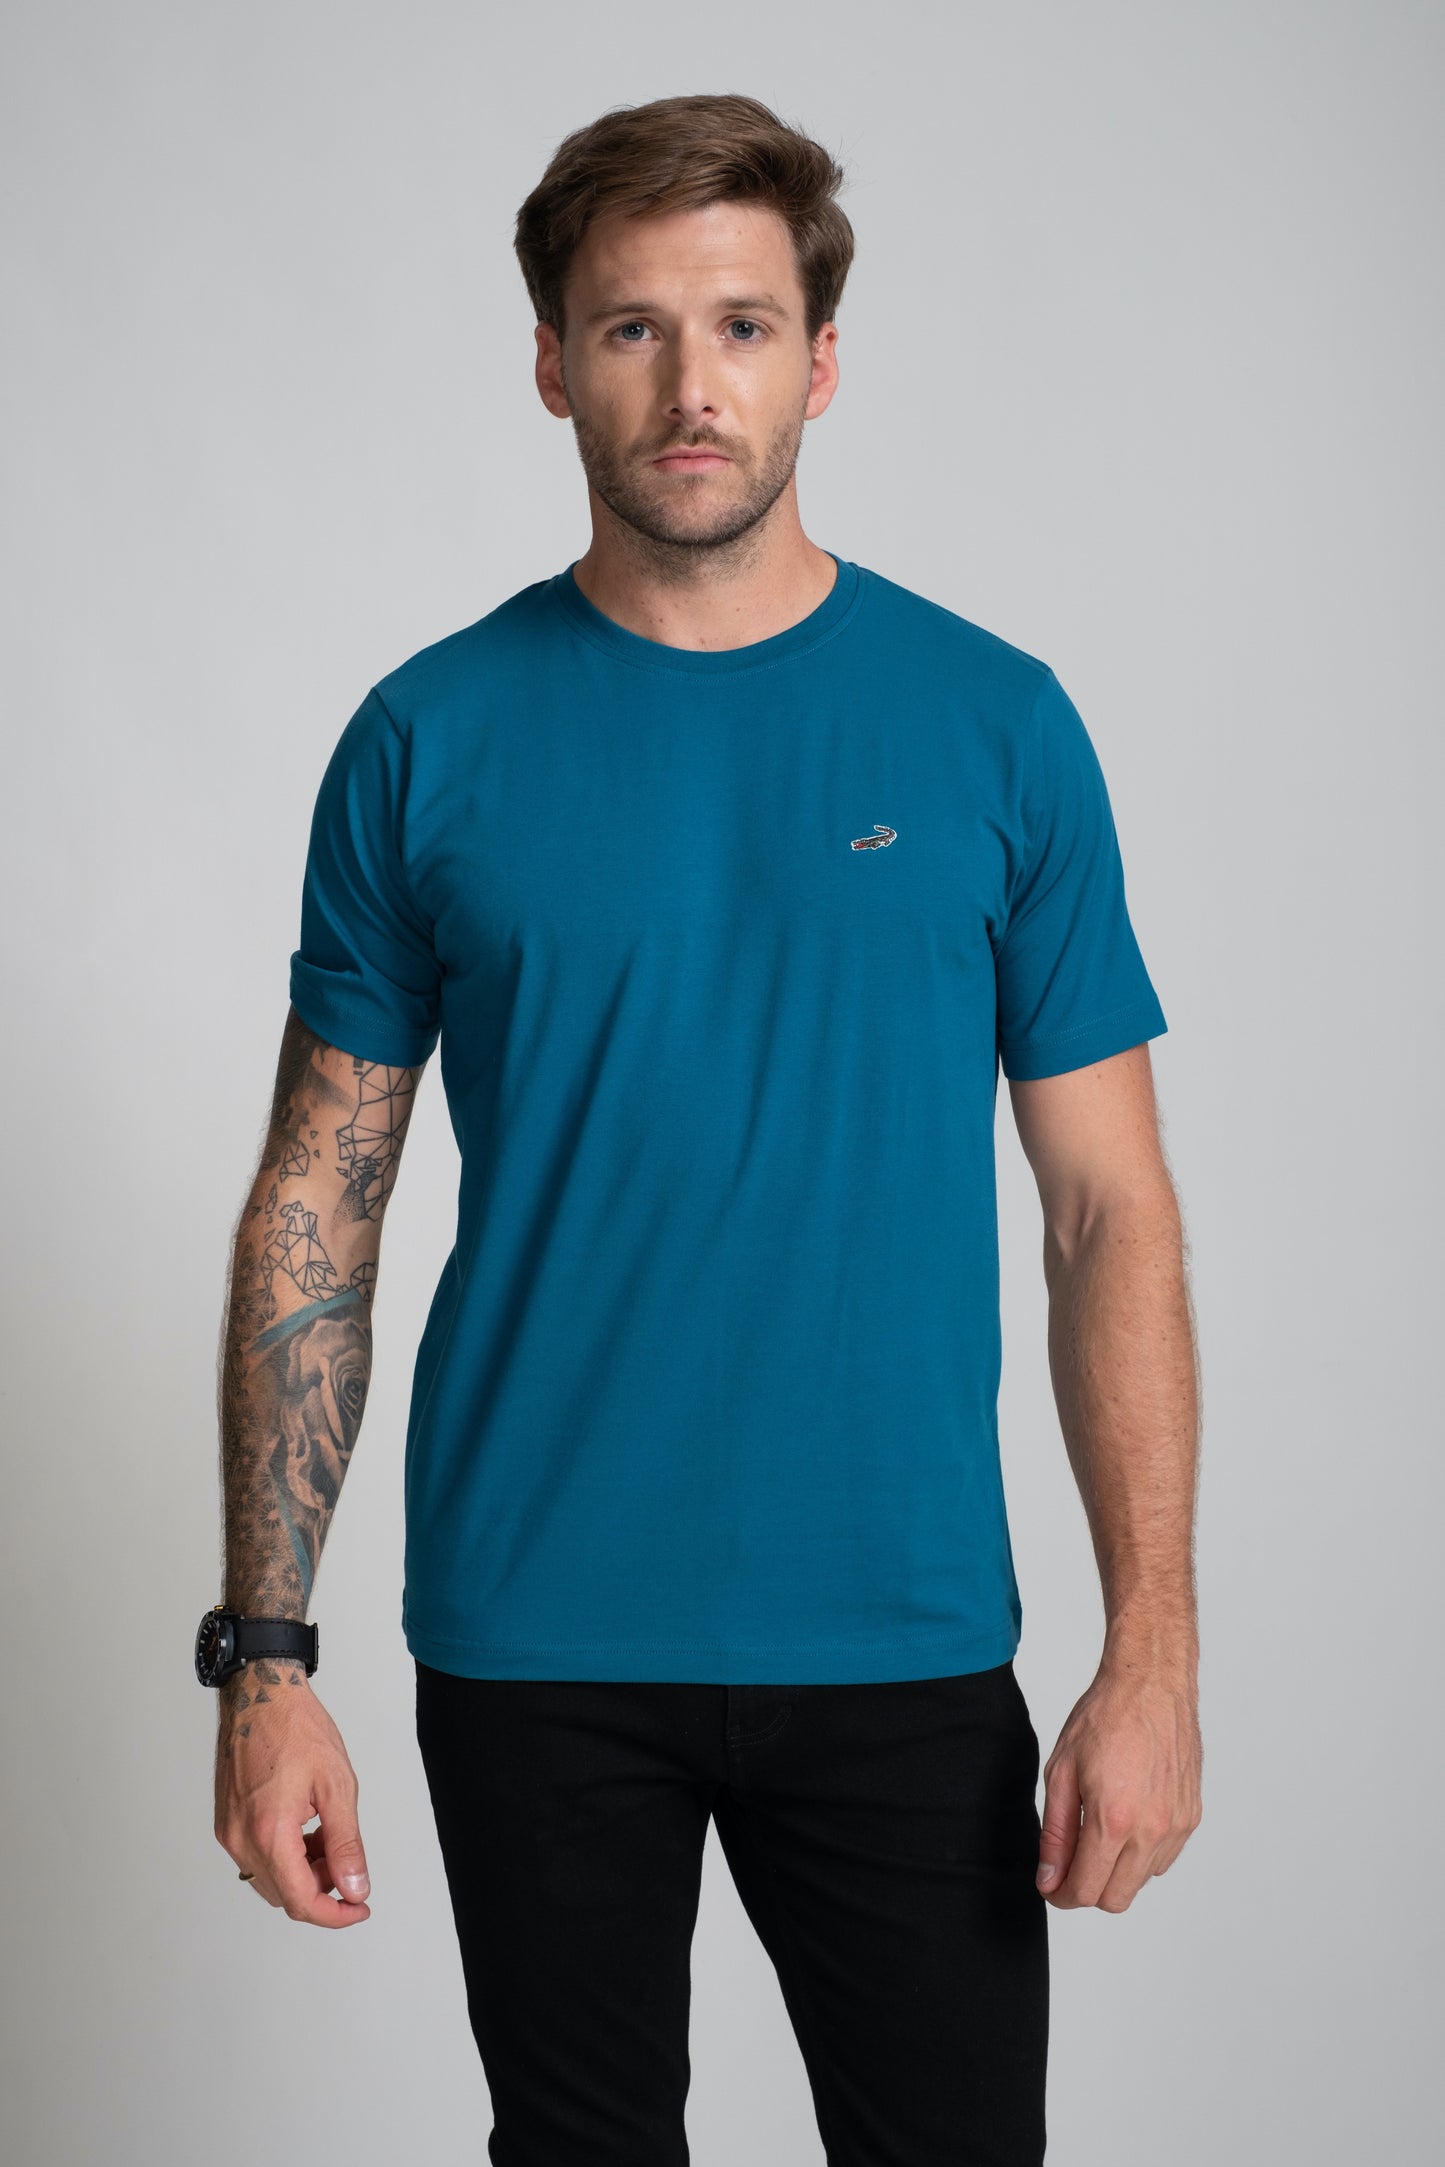 Classic Fit Short sleeves-CasualCrew Neck - Blue Faience